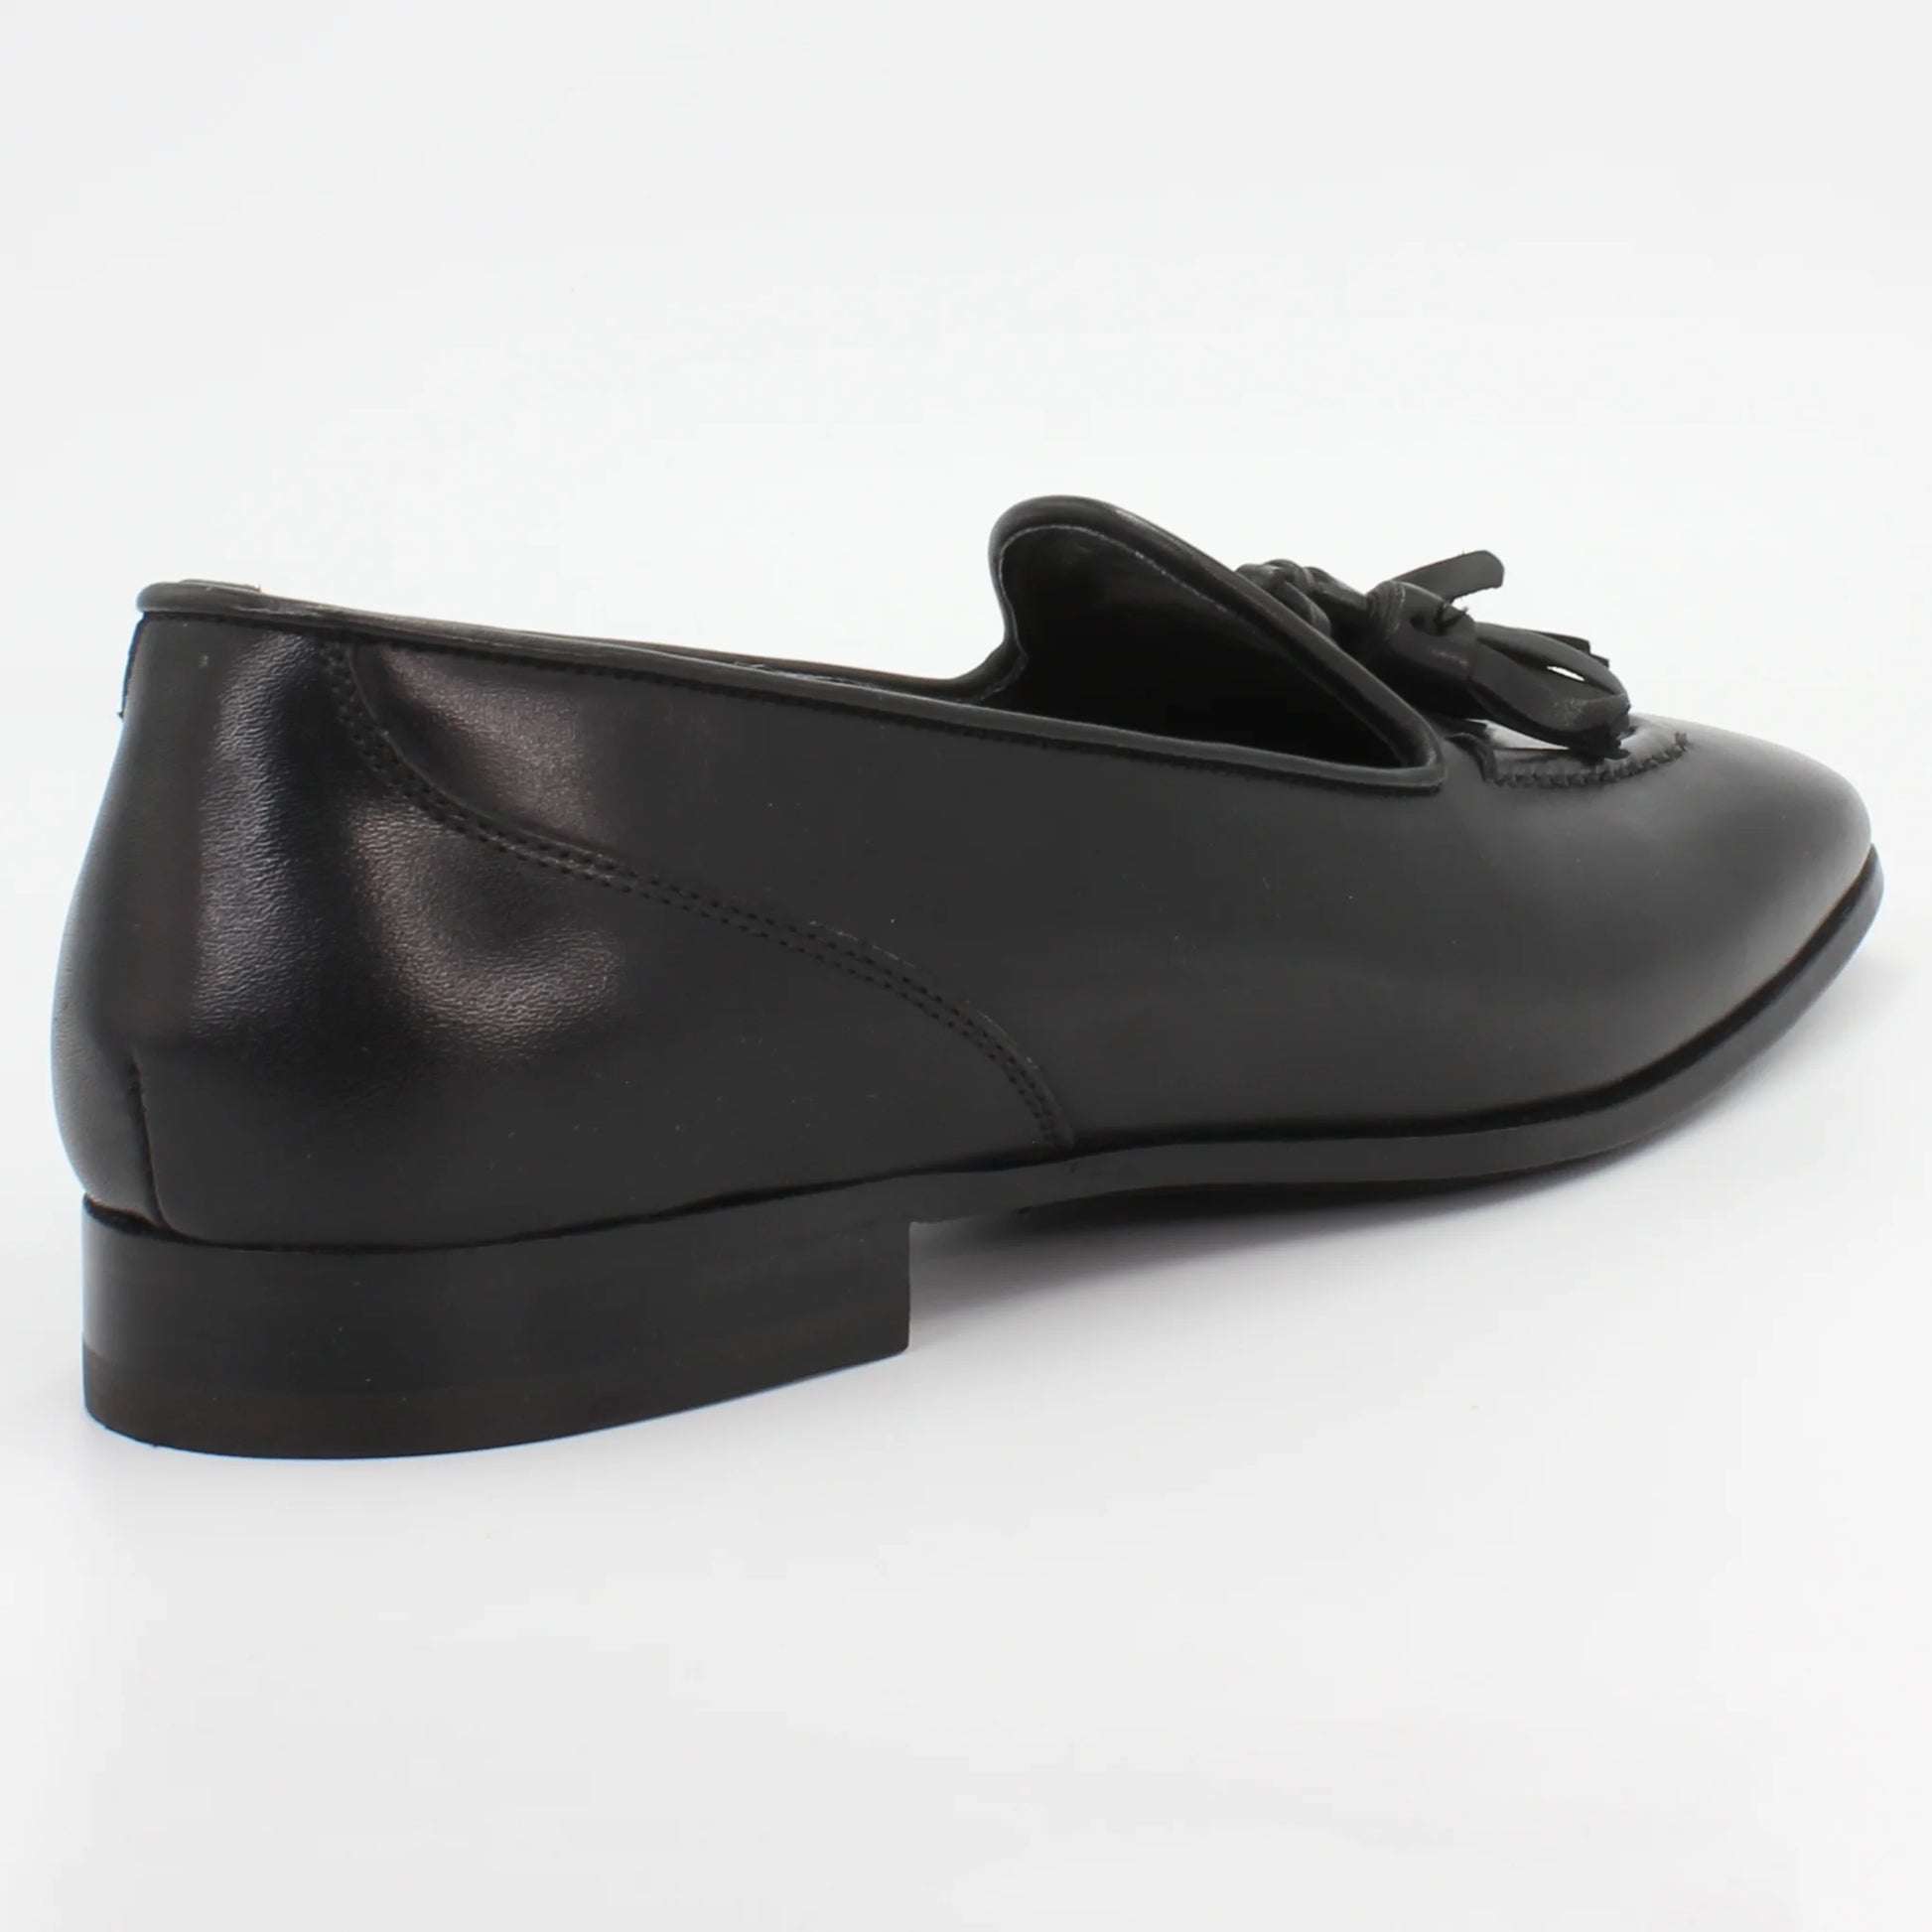 Shop Handmade Italian Leather moccasin in black (BRD10678) or browse our range of hand-made Italian shoes for men in leather or suede in-store at Aliverti Cape Town, or shop online. We deliver in South Africa & offer multiple payment plans as well as accept multiple safe & secure payment methods.